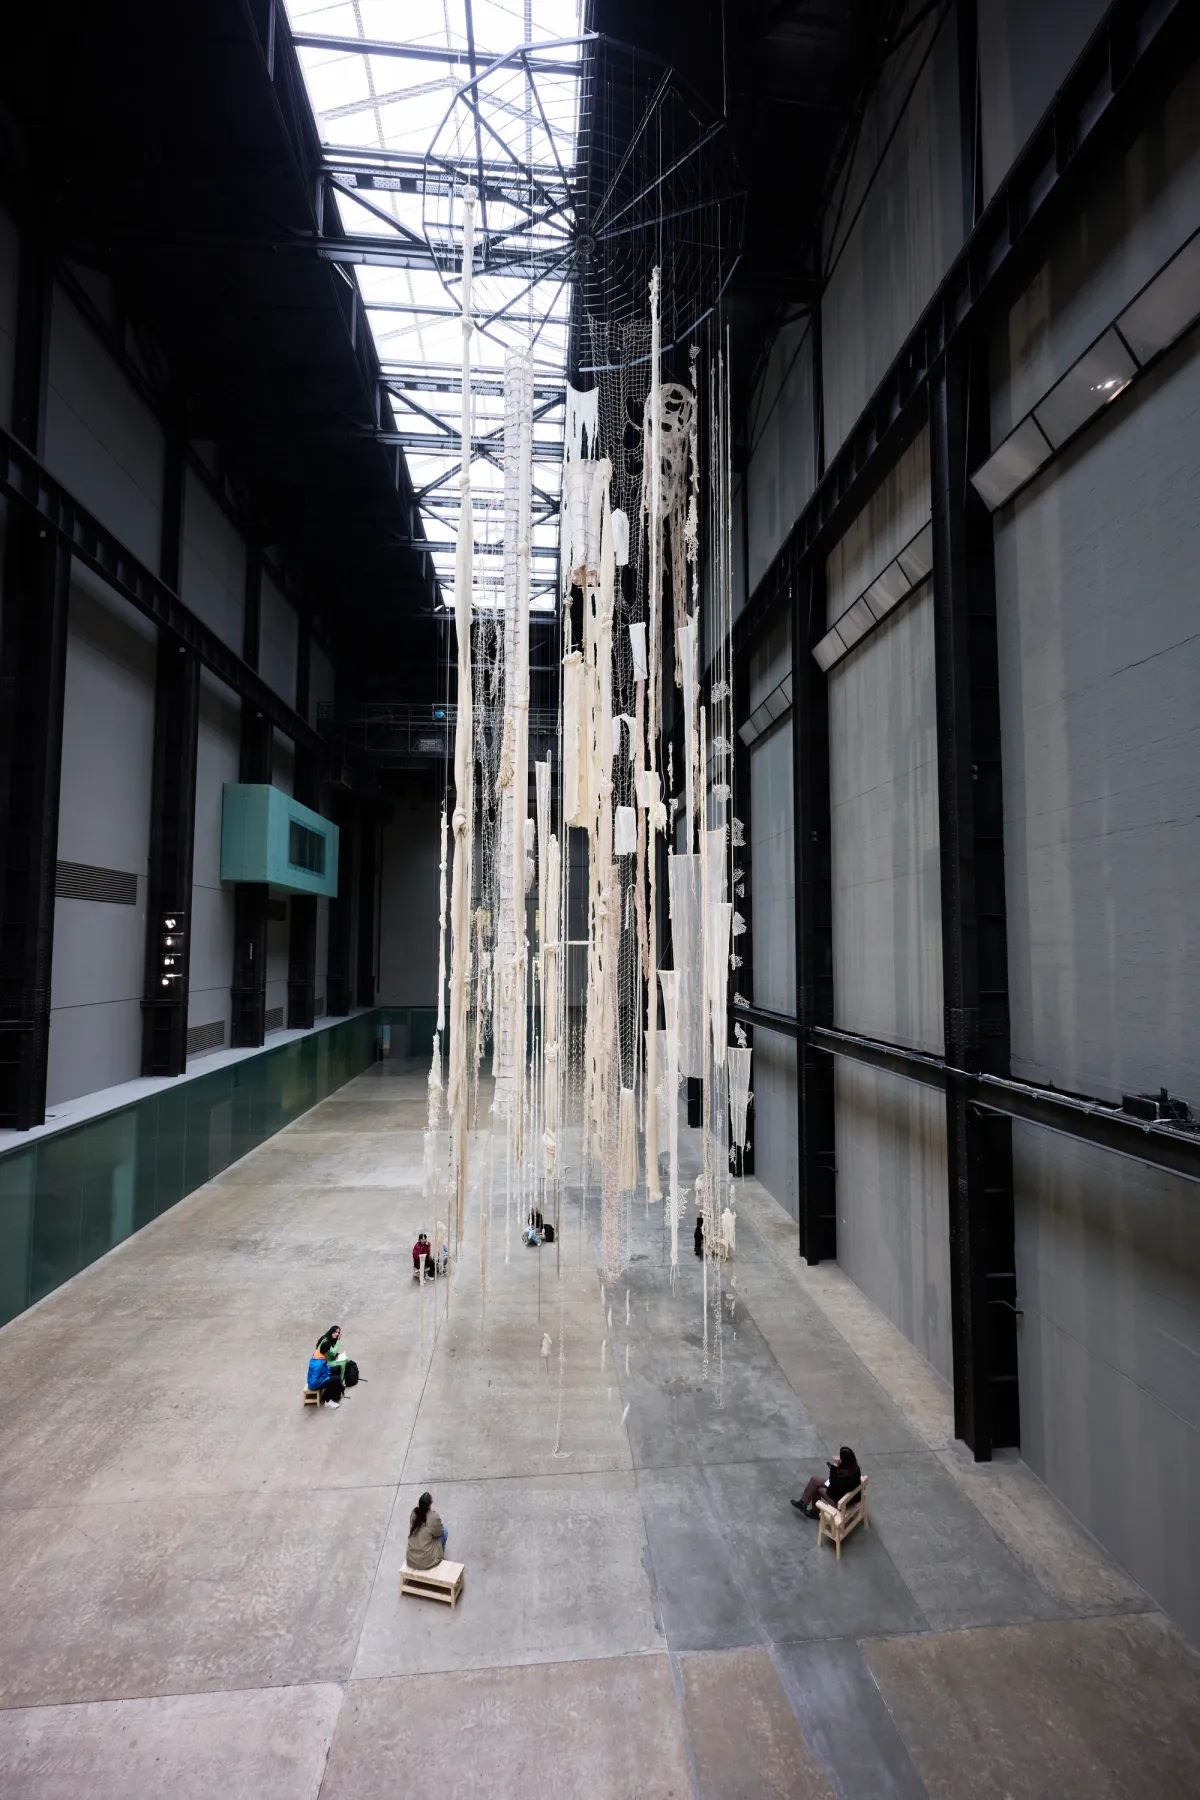 People are sitting on wooden benches arranged in a circular formation beneath an art installation in a large gallery hall. The installation consists of white, ripped curtains, fishnets, and rugs hanging from the ceiling.